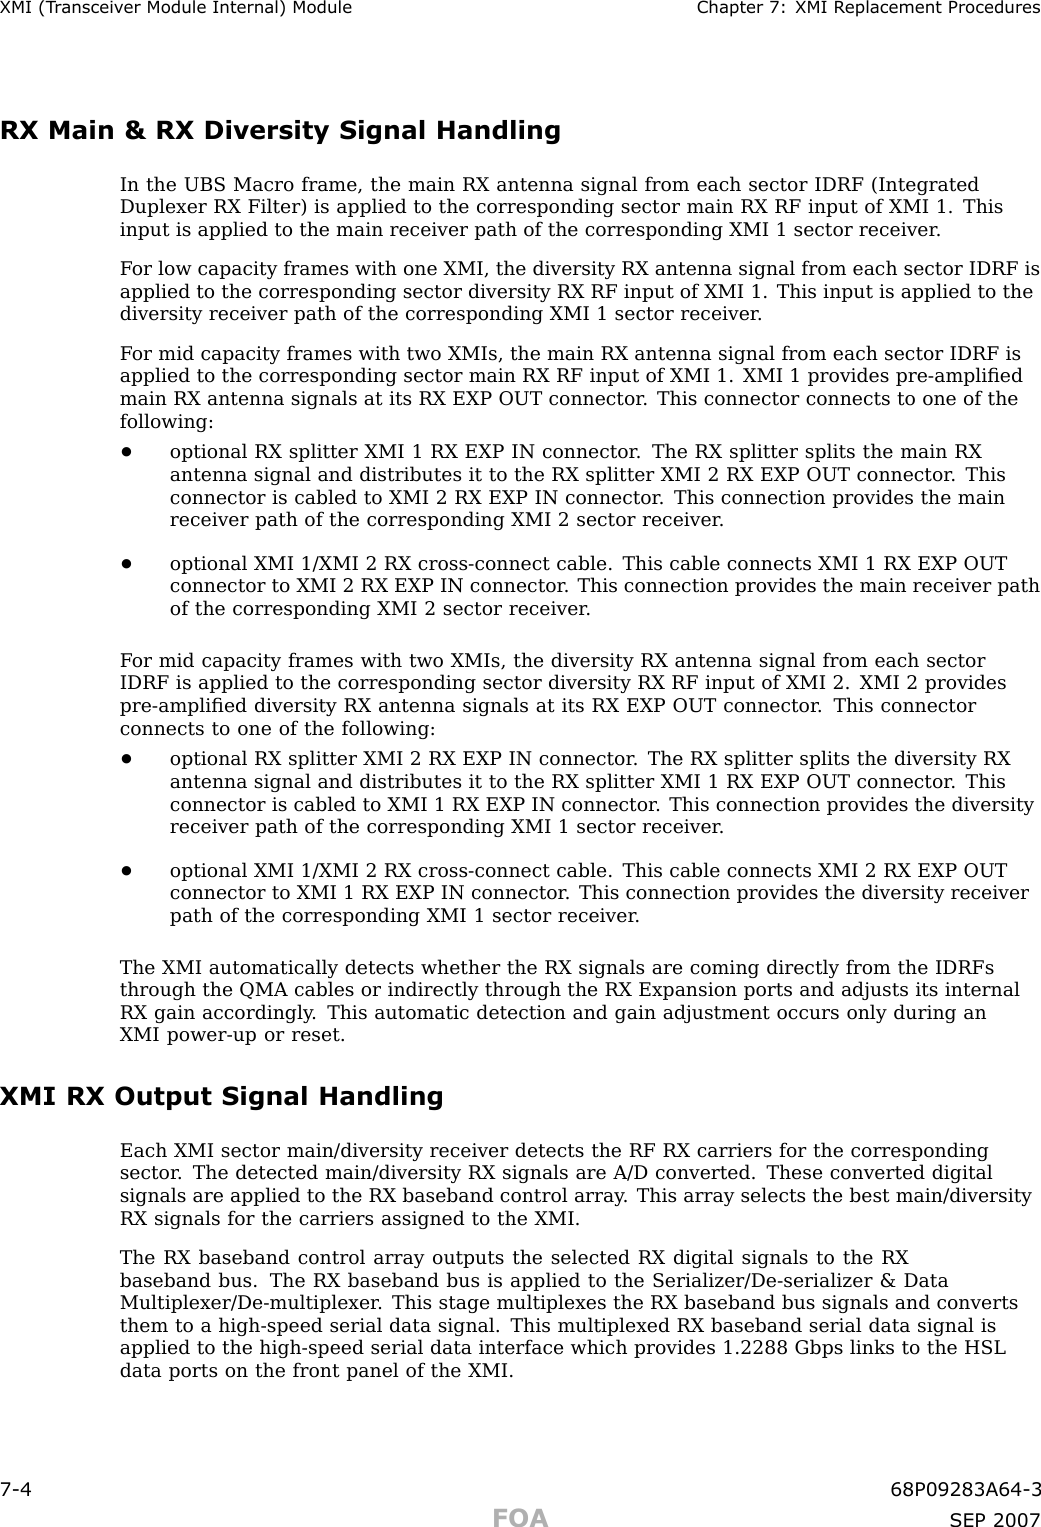 XMI (T r ansceiv er Module Internal) Module Chapter 7: XMI R eplacement ProceduresRX Main &amp; RX Diversity Signal HandlingIn the UBS Macro frame, the main RX antenna signal from each sector IDRF (IntegratedDuplexer RX Filter) is applied to the corresponding sector main RX RF input of XMI 1. Thisinput is applied to the main receiver path of the corresponding XMI 1 sector receiver .F or low capacity frames with one XMI, the diversity RX antenna signal from each sector IDRF isapplied to the corresponding sector diversity RX RF input of XMI 1. This input is applied to thediversity receiver path of the corresponding XMI 1 sector receiver .F or mid capacity frames with two XMIs, the main RX antenna signal from each sector IDRF isapplied to the corresponding sector main RX RF input of XMI 1. XMI 1 provides pre -ampliﬁedmain RX antenna signals at its RX EXP OUT connector . This connector connects to one of thefollowing:•optional RX splitter XMI 1 RX EXP IN connector . The RX splitter splits the main RXantenna signal and distributes it to the RX splitter XMI 2 RX EXP OUT connector . Thisconnector is cabled to XMI 2 RX EXP IN connector . This connection provides the mainreceiver path of the corresponding XMI 2 sector receiver .•optional XMI 1/XMI 2 RX cross -connect cable. This cable connects XMI 1 RX EXP OUTconnector to XMI 2 RX EXP IN connector . This connection provides the main receiver pathof the corresponding XMI 2 sector receiver .F or mid capacity frames with two XMIs, the diversity RX antenna signal from each sectorIDRF is applied to the corresponding sector diversity RX RF input of XMI 2. XMI 2 providespre -ampliﬁed diversity RX antenna signals at its RX EXP OUT connector . This connectorconnects to one of the following:•optional RX splitter XMI 2 RX EXP IN connector . The RX splitter splits the diversity RXantenna signal and distributes it to the RX splitter XMI 1 RX EXP OUT connector . Thisconnector is cabled to XMI 1 RX EXP IN connector . This connection provides the diversityreceiver path of the corresponding XMI 1 sector receiver .•optional XMI 1/XMI 2 RX cross -connect cable. This cable connects XMI 2 RX EXP OUTconnector to XMI 1 RX EXP IN connector . This connection provides the diversity receiverpath of the corresponding XMI 1 sector receiver .The XMI automatically detects whether the RX signals are coming directly from the IDRFsthrough the QMA cables or indirectly through the RX Expansion ports and adjusts its internalRX gain accordingly . This automatic detection and gain adjustment occurs only during anXMI power -up or reset.XMI RX Output Signal HandlingEach XMI sector main/diversity receiver detects the RF RX carriers for the correspondingsector . The detected main/diversity RX signals are A/D converted. These converted digitalsignals are applied to the RX baseband control array . This array selects the best main/diversityRX signals for the carriers assigned to the XMI.The RX baseband control array outputs the selected RX digital signals to the RXbaseband bus. The RX baseband bus is applied to the Serializer/De -serializer &amp; DataMultiplexer/De -multiplexer . This stage multiplexes the RX baseband bus signals and convertsthem to a high -speed serial data signal. This multiplexed RX baseband serial data signal isapplied to the high -speed serial data interface which provides 1.2288 Gbps links to the HSLdata ports on the front panel of the XMI.7 -4 68P09283A64 -3FOA SEP 2007